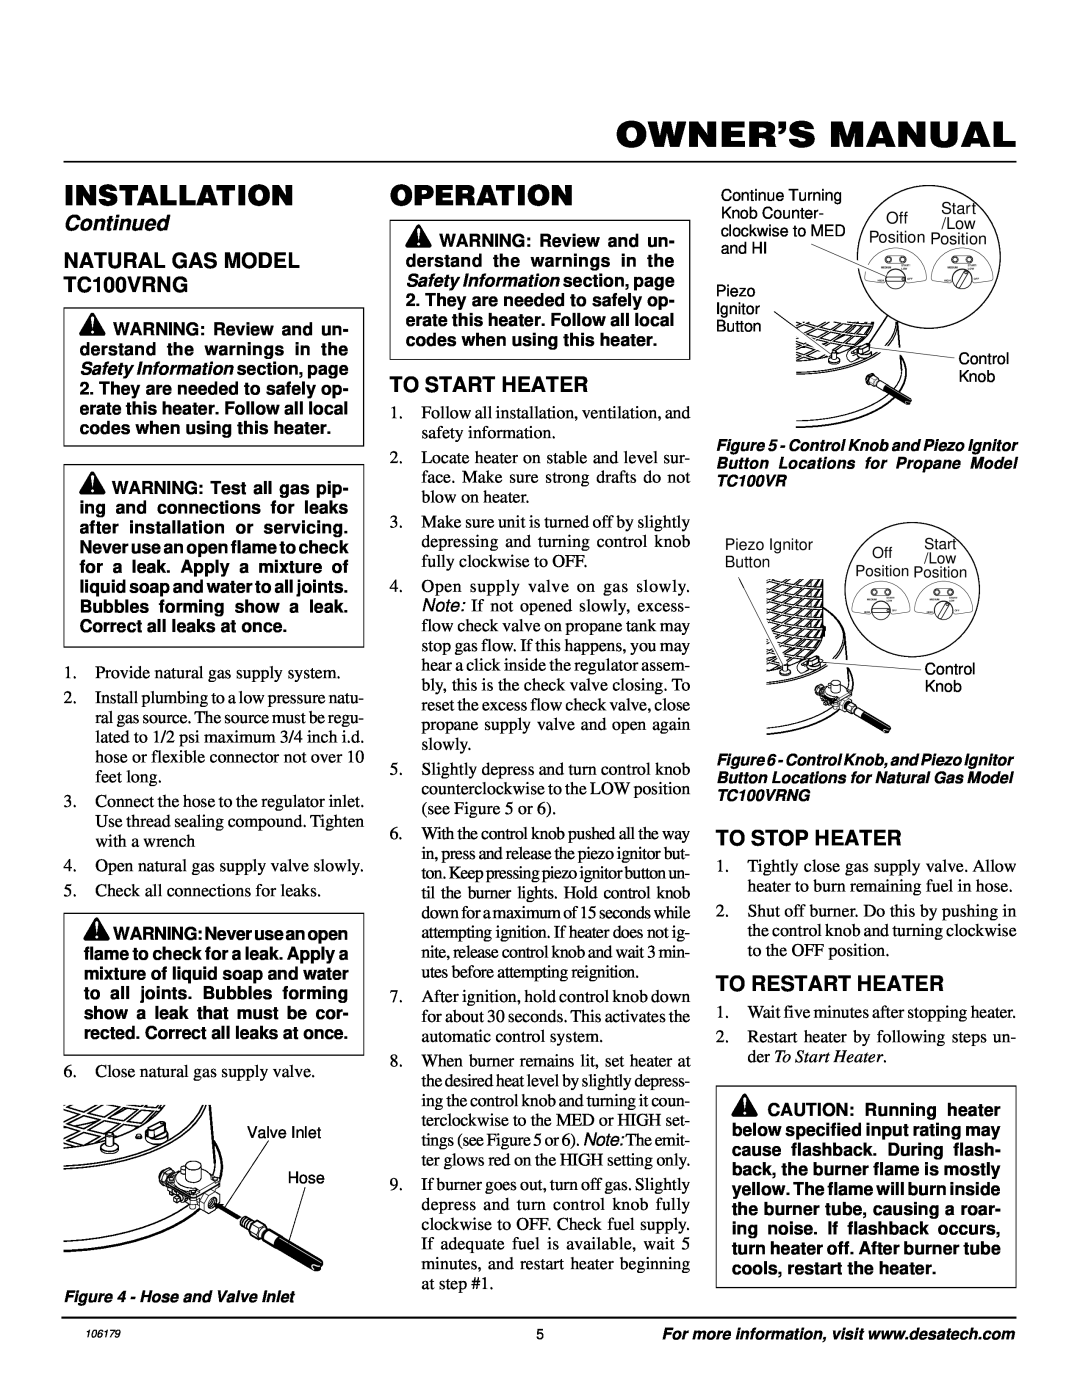 Desa TC100VRNG owner manual Operation, To Start Heater, To Stop Heater, To Restart Heater, Installation, Continued 